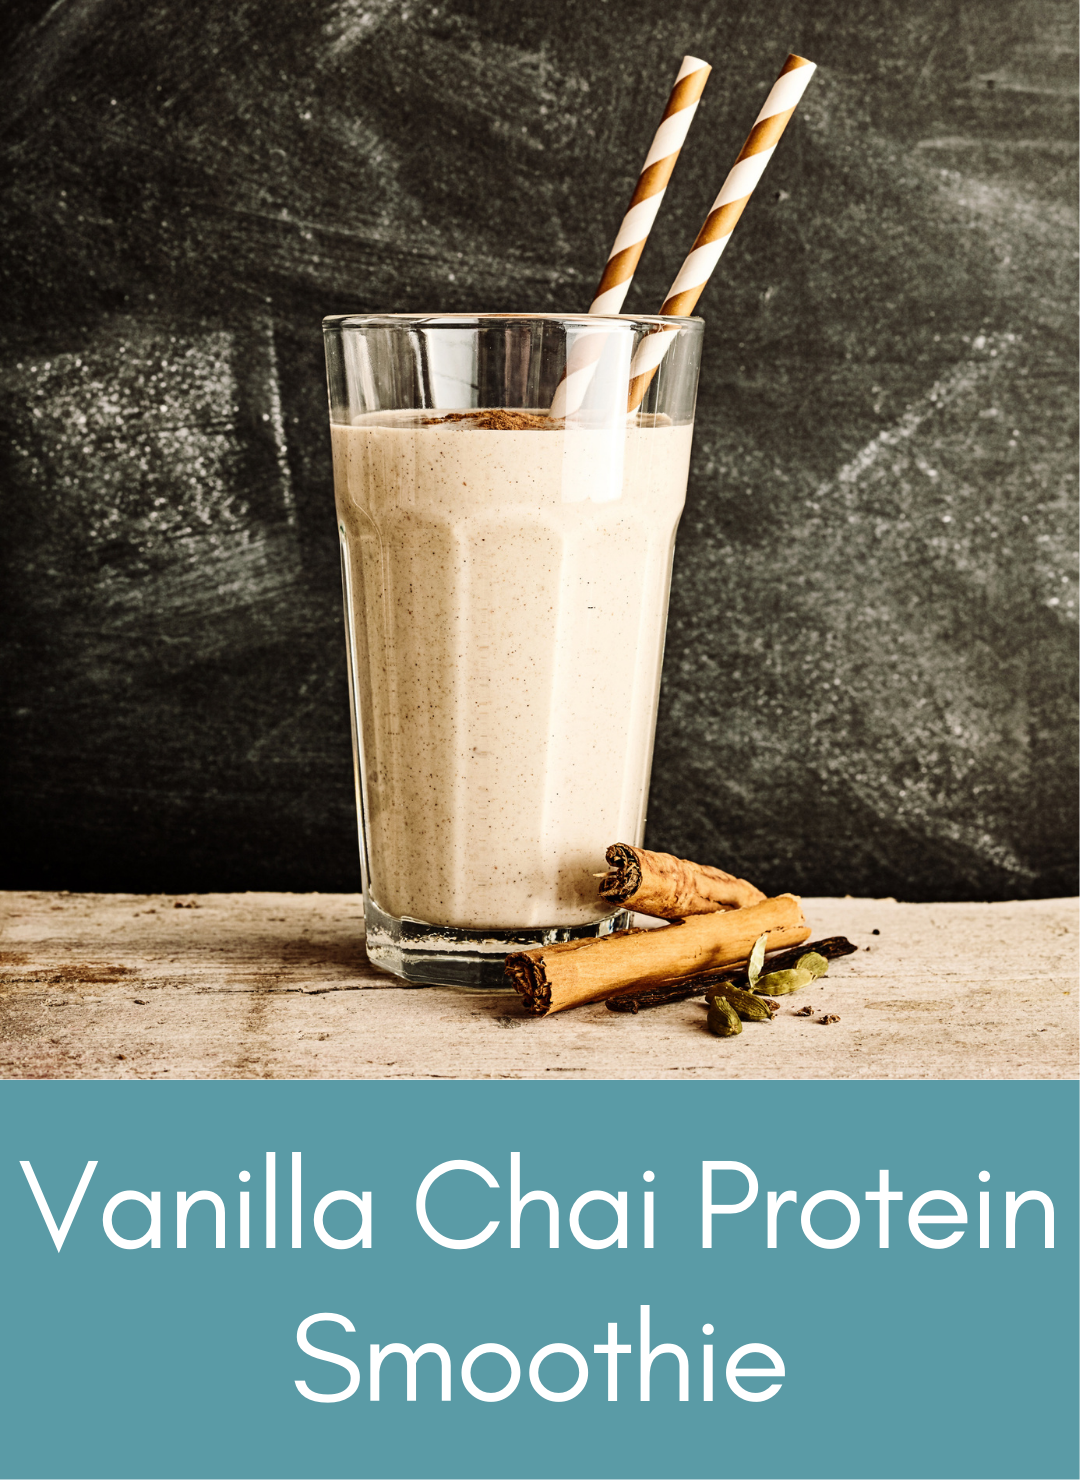 Vanilla chai protein superfood power smoothie Picture with link to recipe